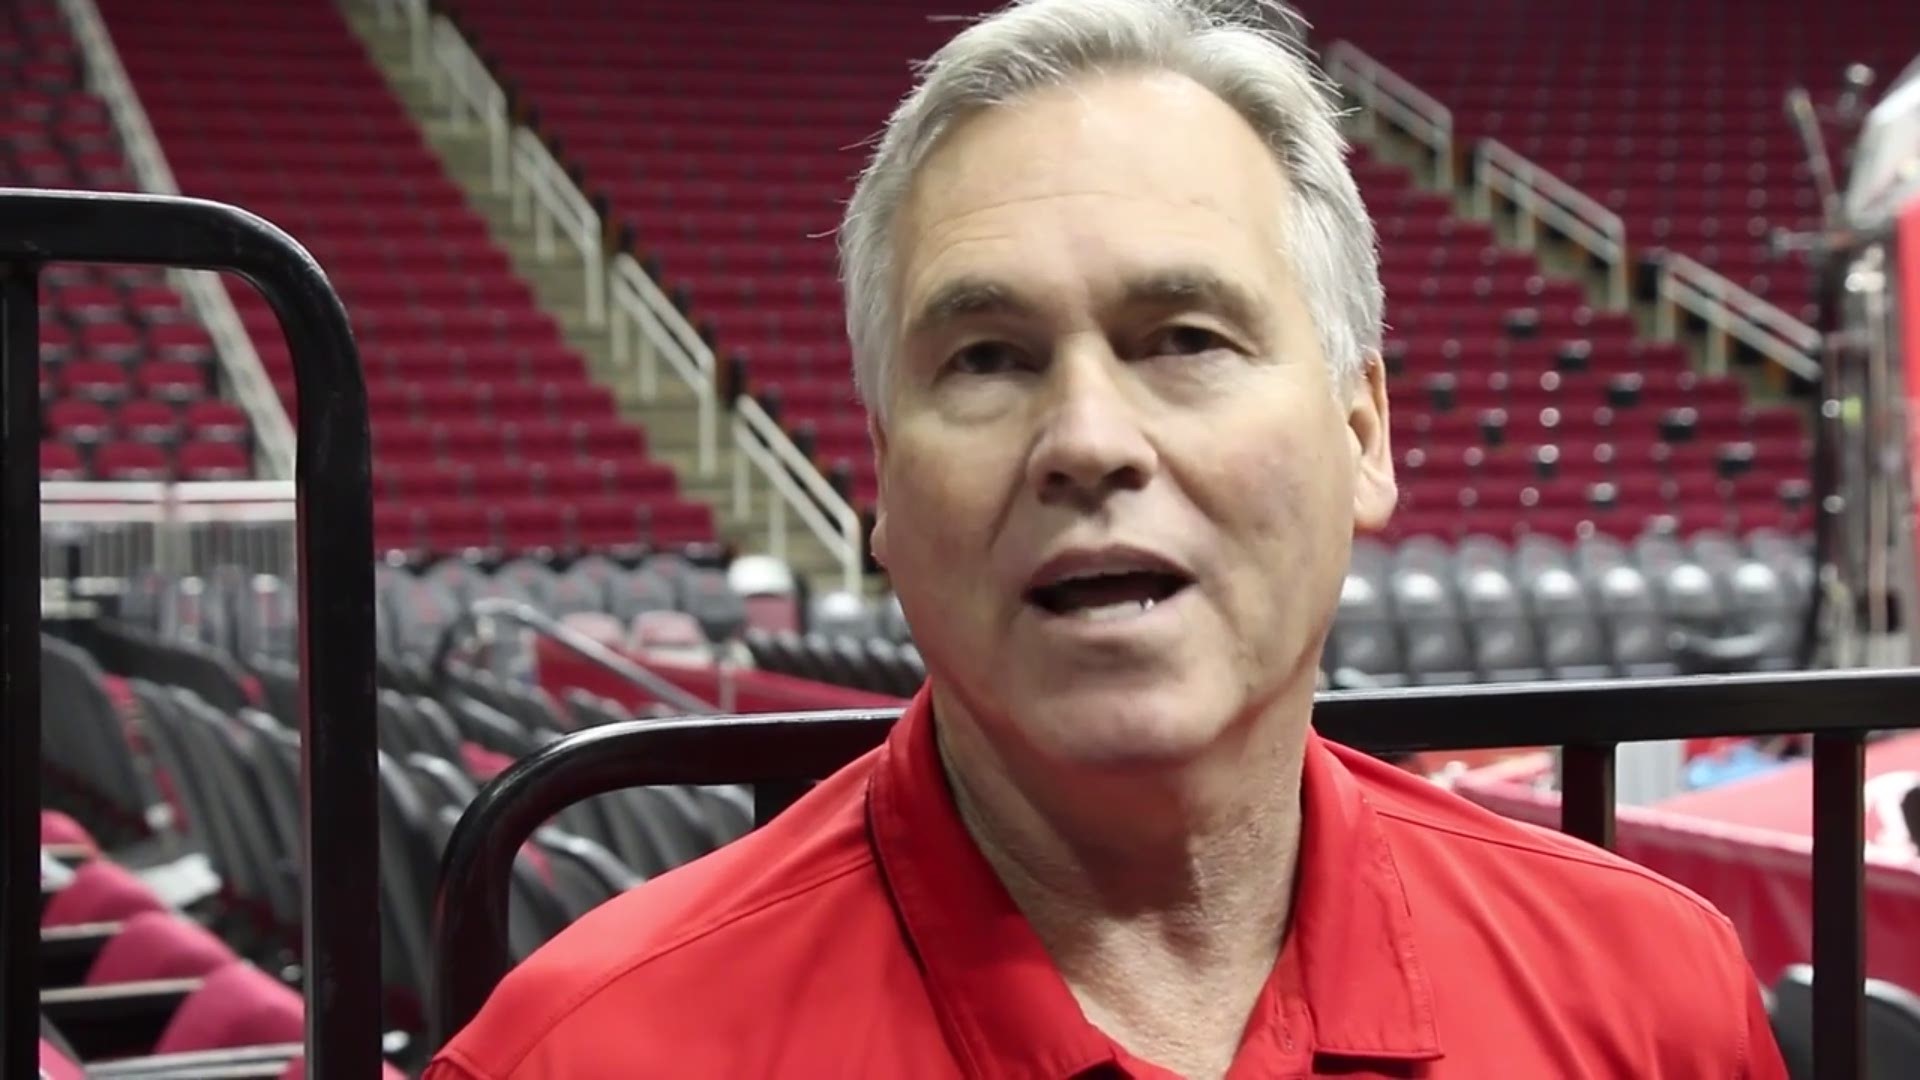 Head coach Mike D'Antoni meets with the media May 12, 2018, just two days before game 1 of the Houston Rockets' showdown in the Western Conference finals against the Golden State Warriors.